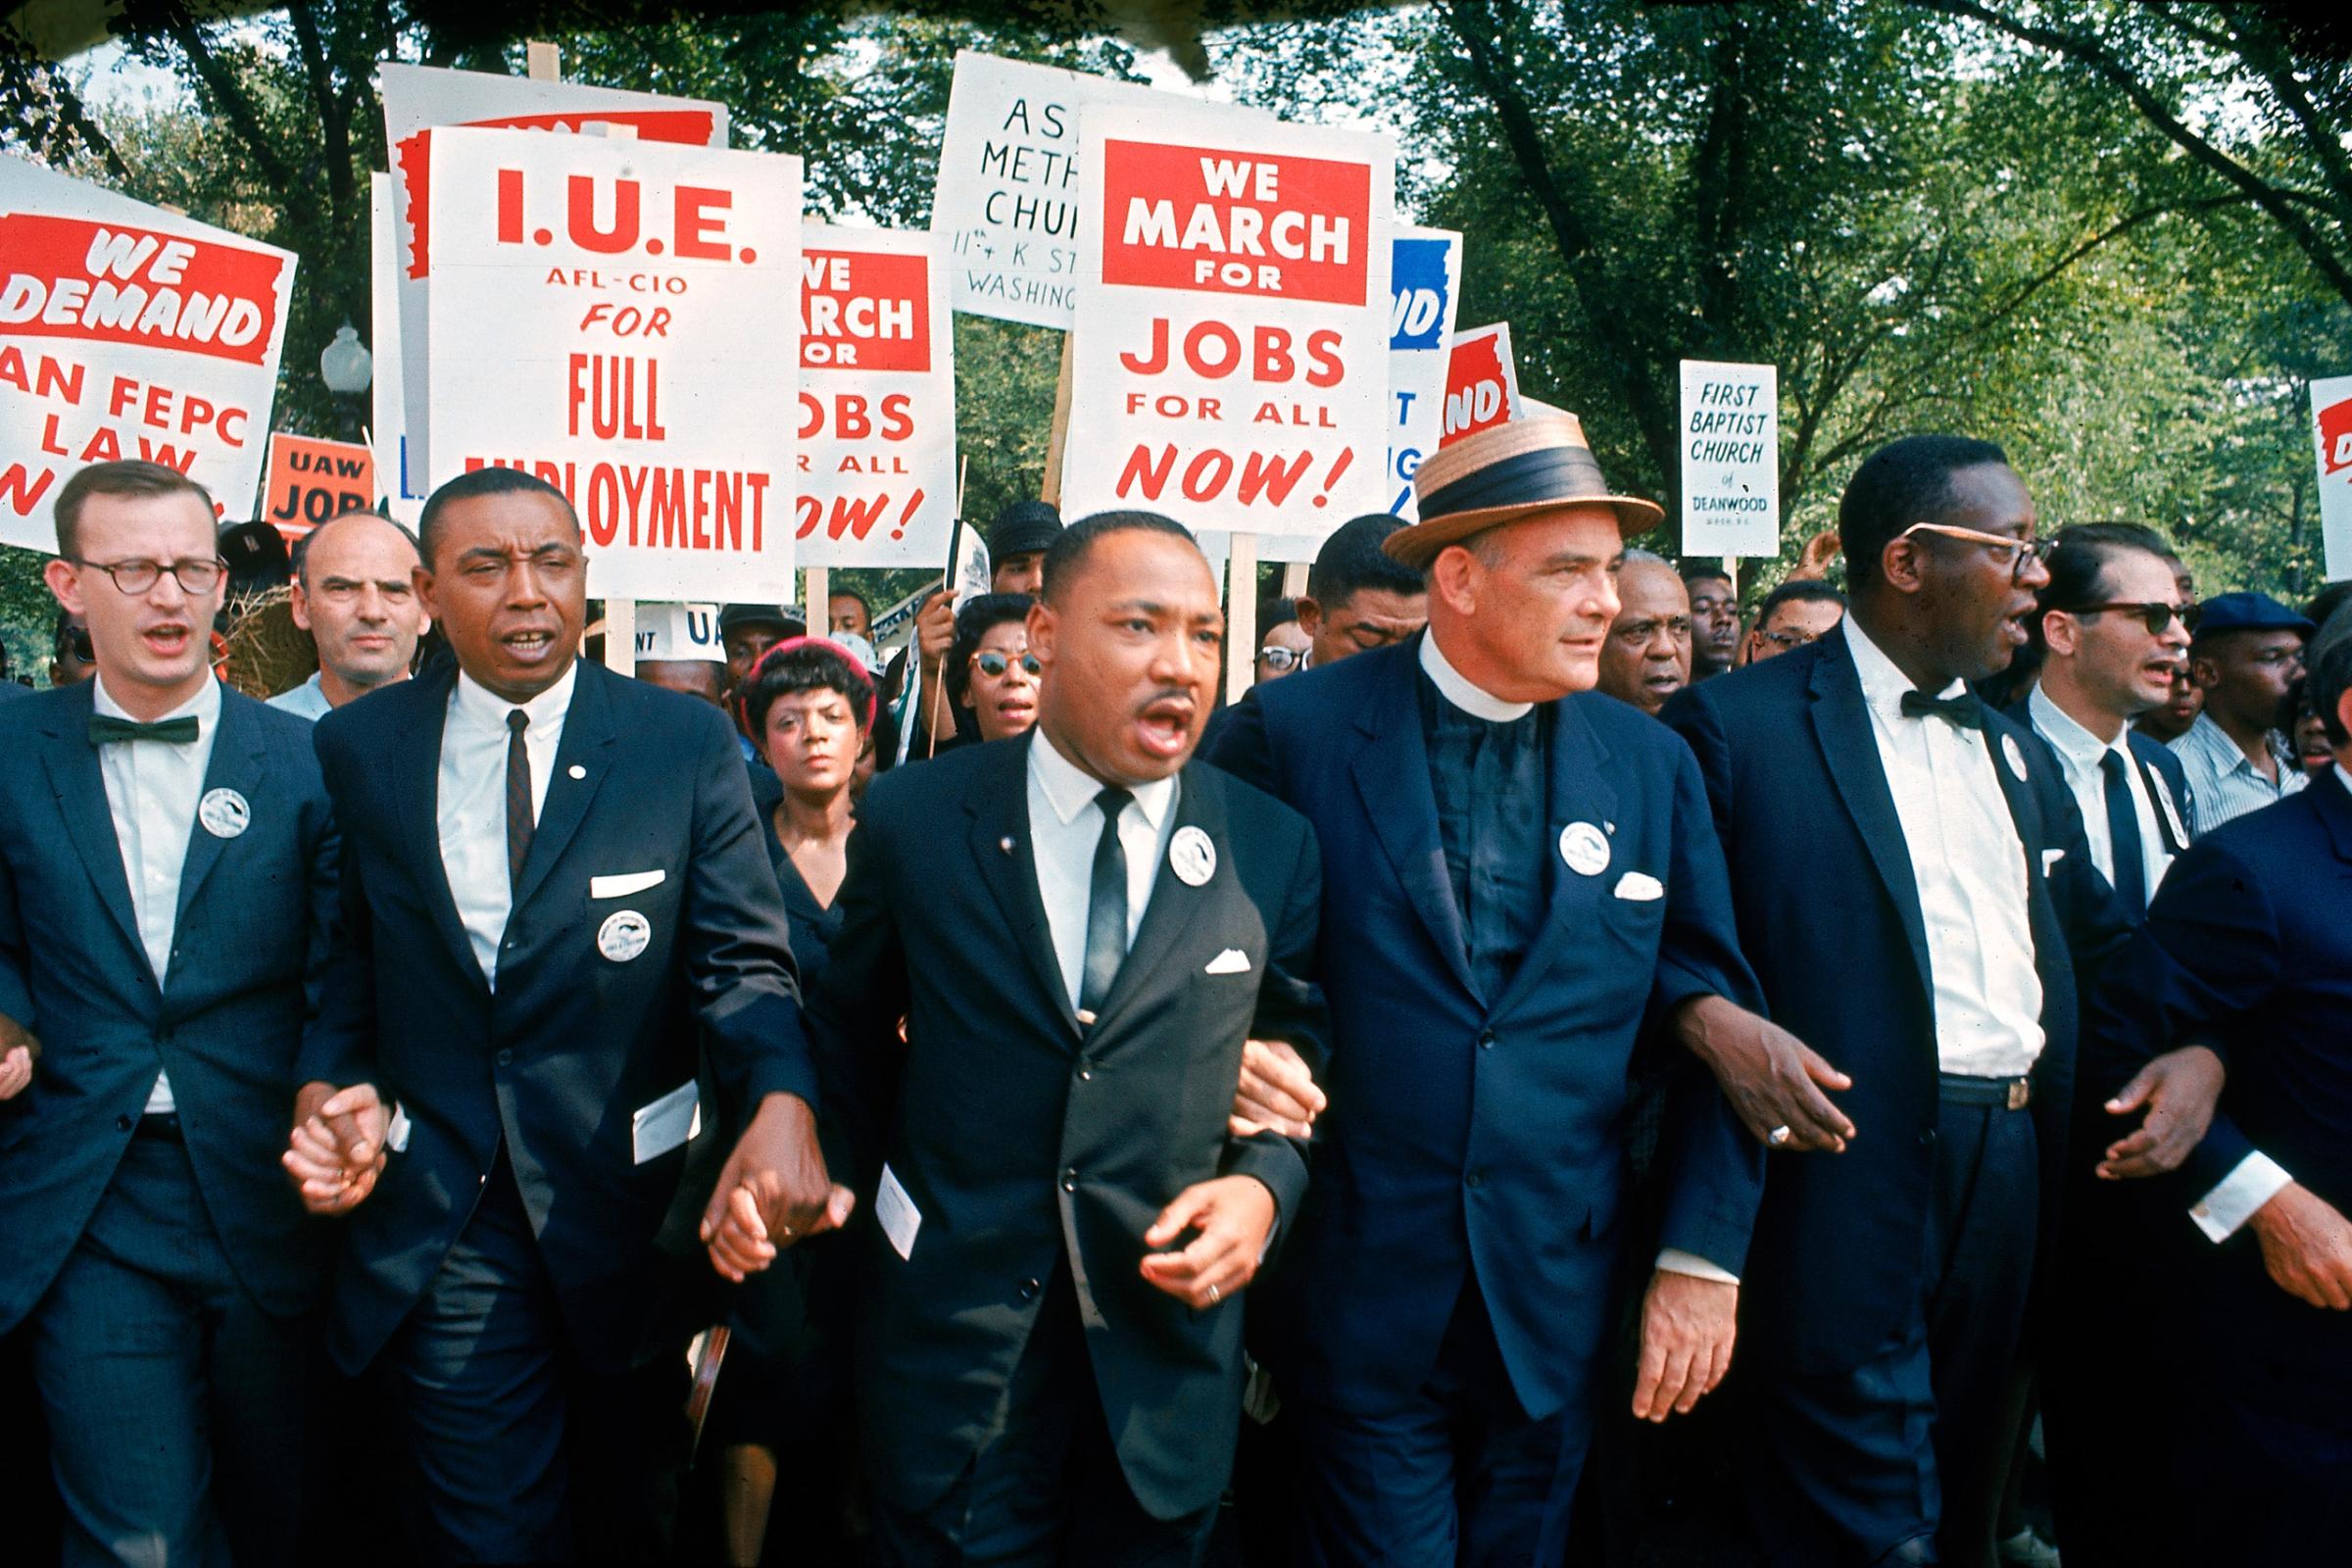 Leaders of March on Washington for Jobs and Freedom marching w. signs (R-L): Matthew Ahmann, Floyd McKissick, Martin Luther King Jr., Rev. Eugene Carson Blake and unidentified.